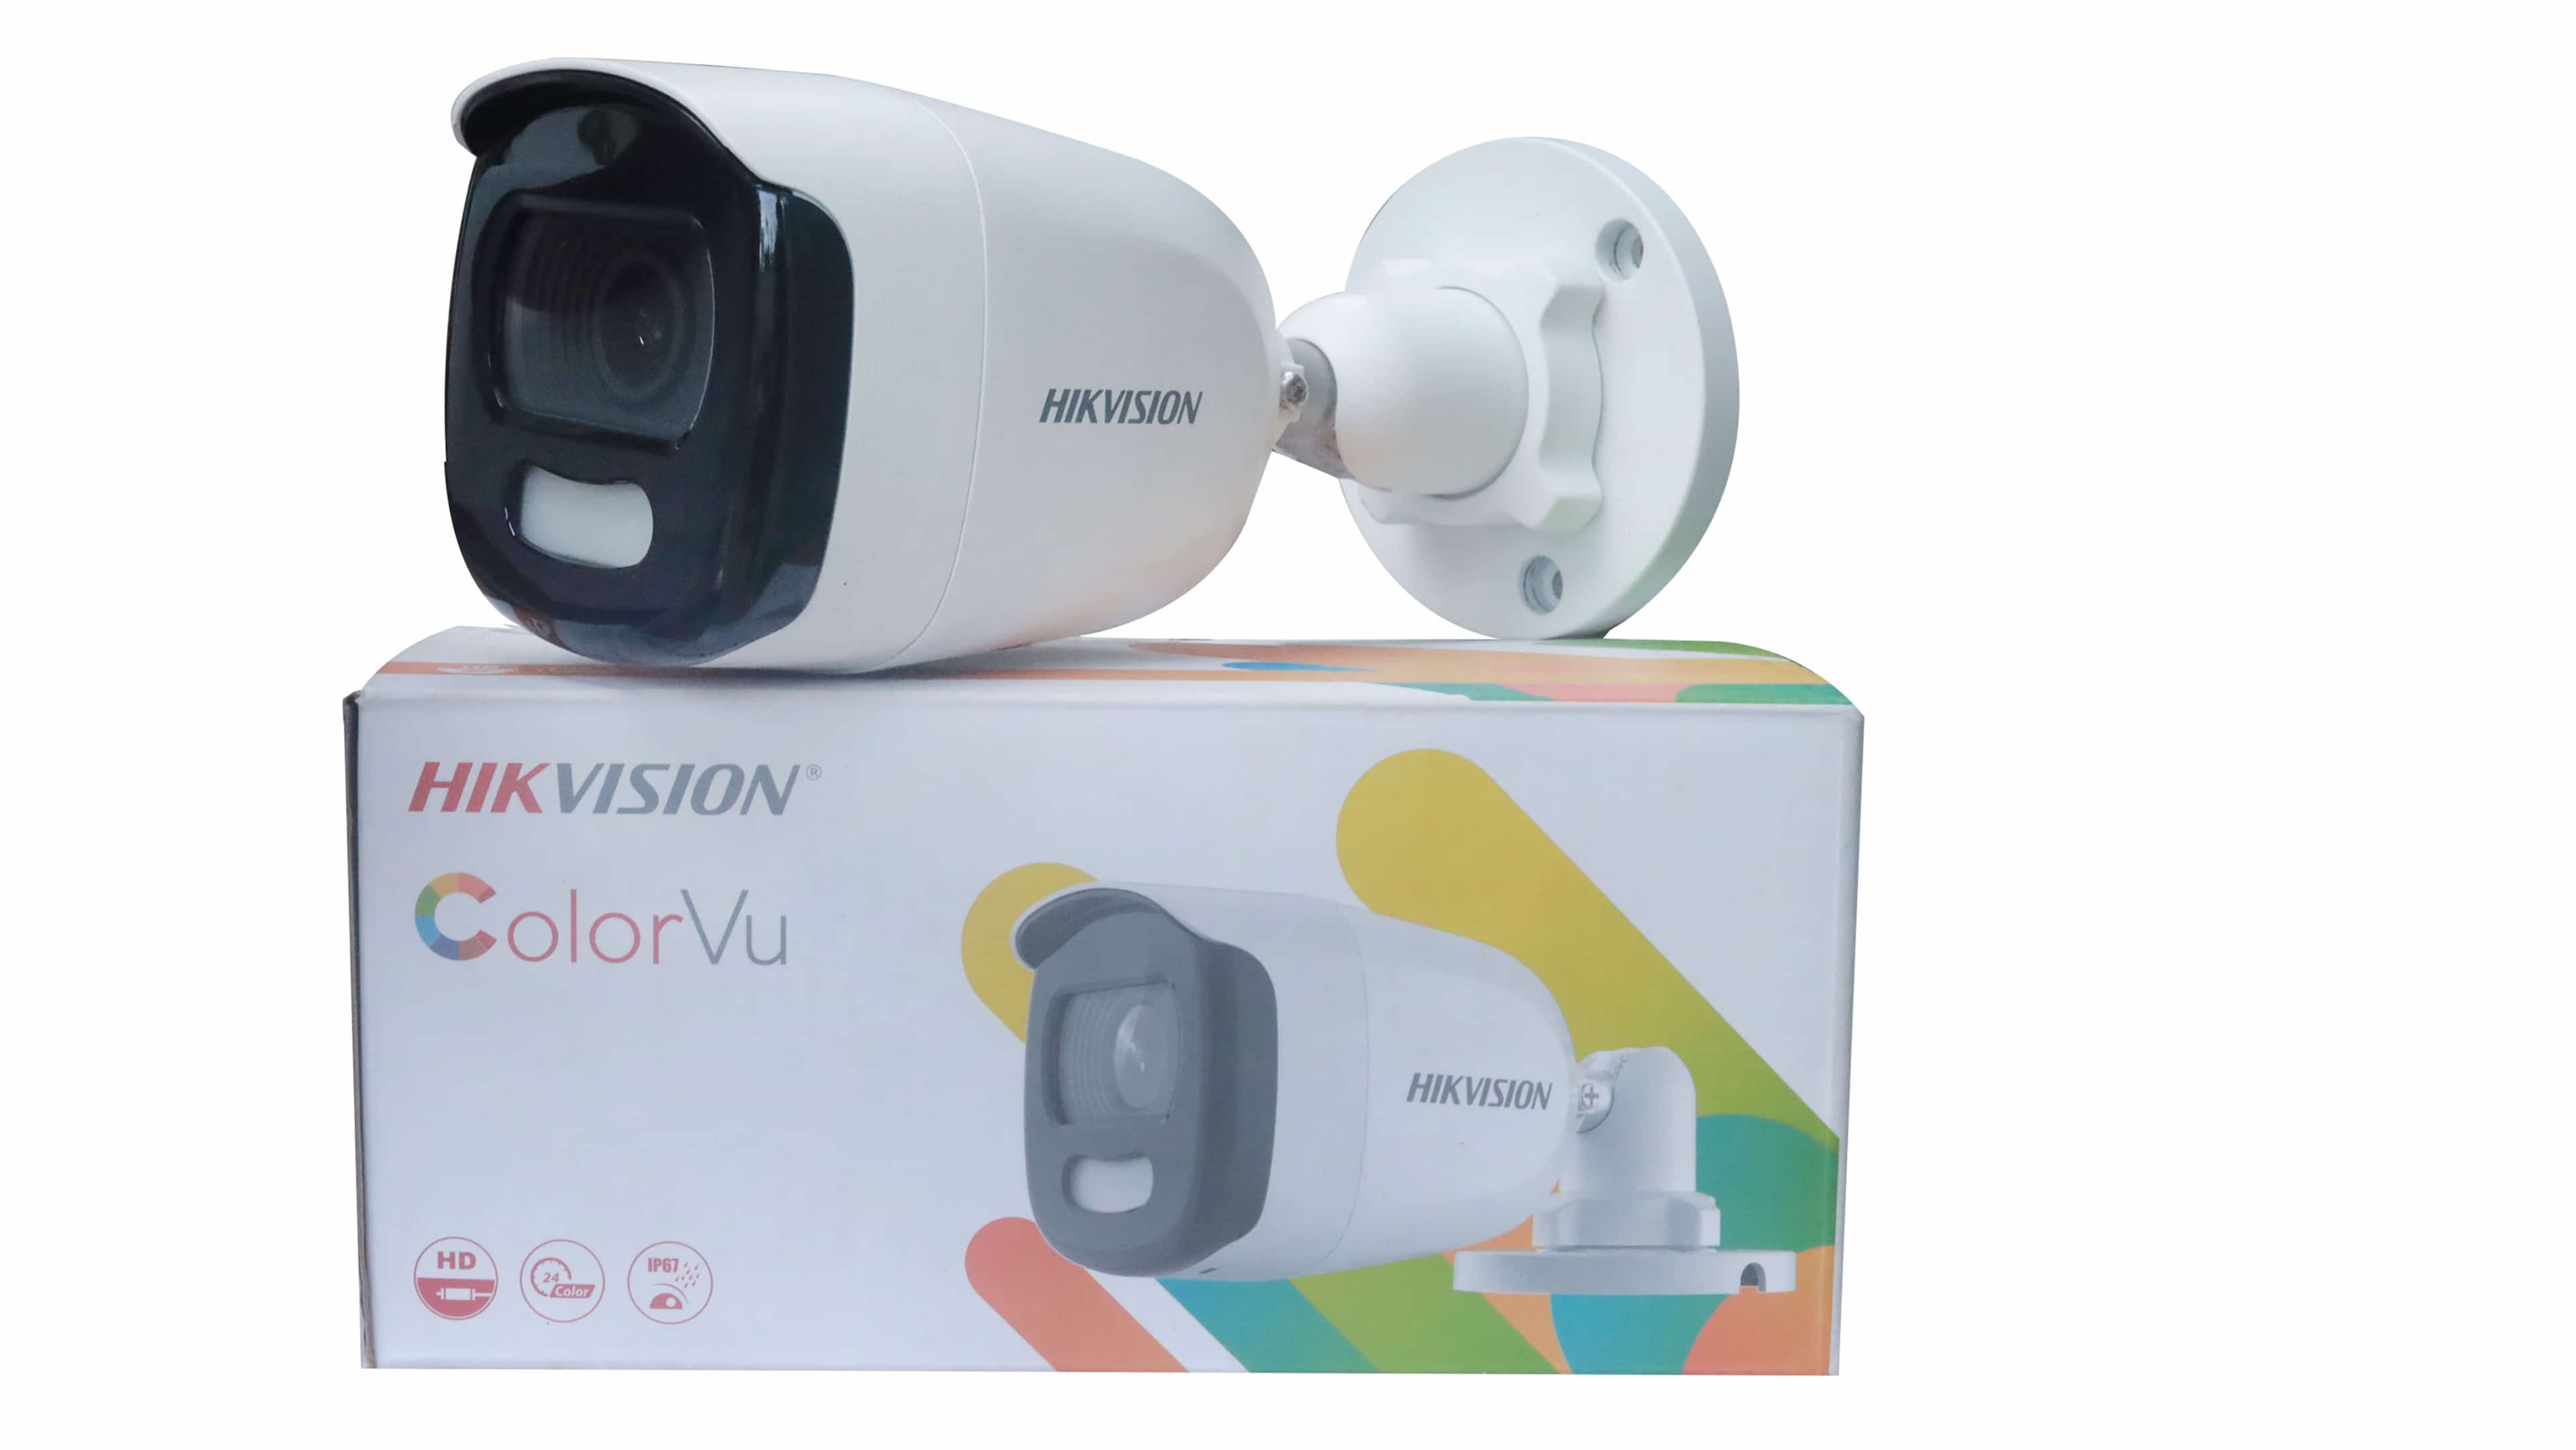 Hikvision 5 MP ColorVu Fixed Mini Bullet Camera, DS-2CE10HFT-F, with Day & Night Color Video, Color Night Vision, True WDR and IP67